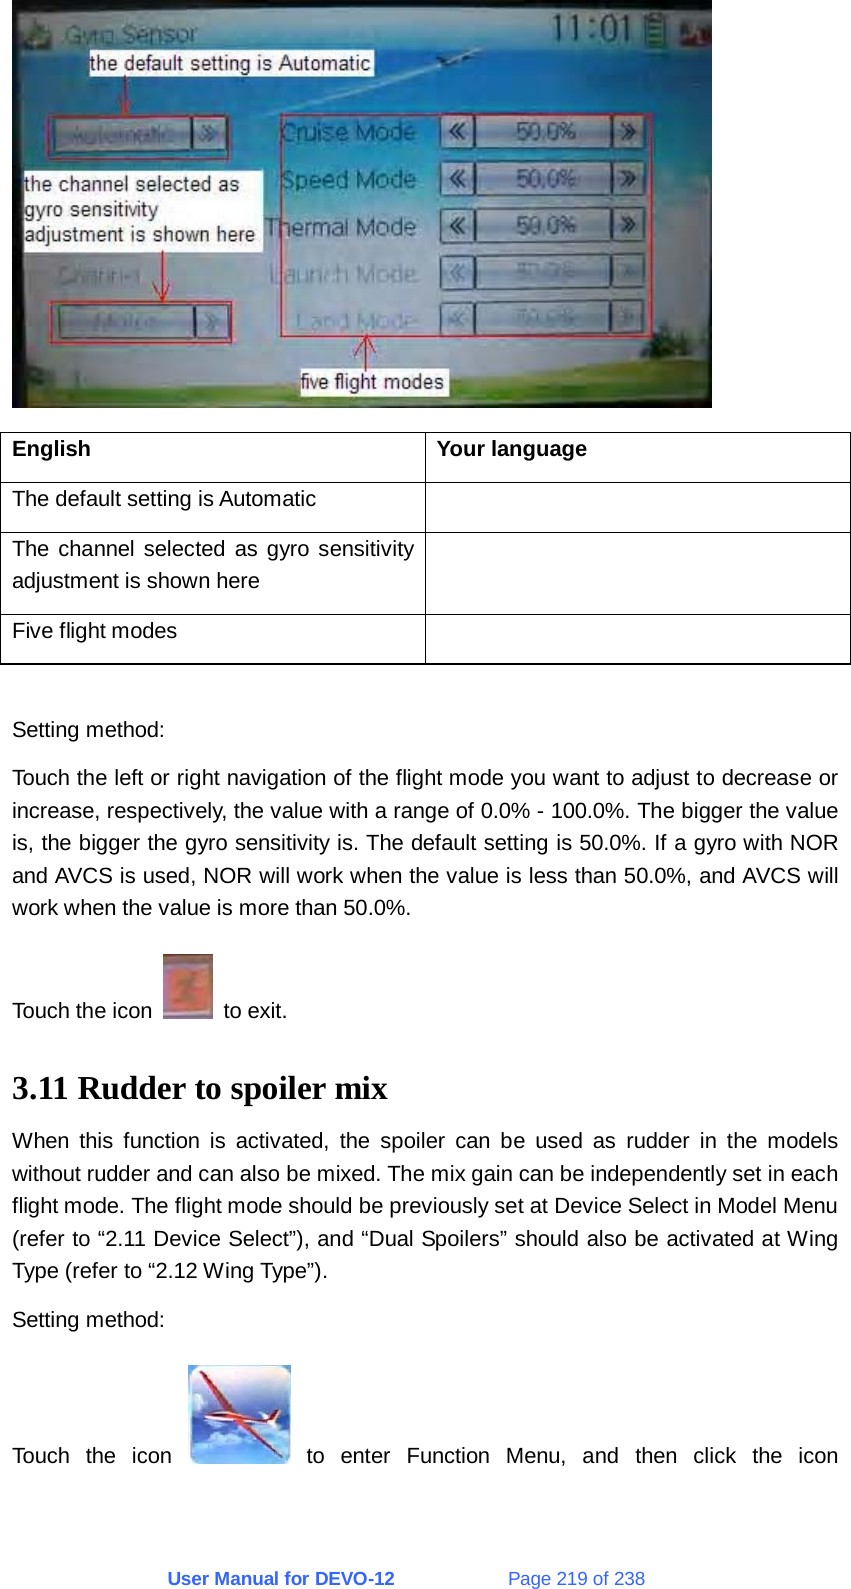 User Manual for DEVO-12             Page 219 of 238  English Your language The default setting is Automatic   The channel selected as gyro sensitivity adjustment is shown here  Five flight modes    Setting method: Touch the left or right navigation of the flight mode you want to adjust to decrease or increase, respectively, the value with a range of 0.0% - 100.0%. The bigger the value is, the bigger the gyro sensitivity is. The default setting is 50.0%. If a gyro with NOR and AVCS is used, NOR will work when the value is less than 50.0%, and AVCS will work when the value is more than 50.0%. Touch the icon   to exit. 3.11 Rudder to spoiler mix When this function is activated, the spoiler can be used as rudder in the models without rudder and can also be mixed. The mix gain can be independently set in each flight mode. The flight mode should be previously set at Device Select in Model Menu (refer to “2.11 Device Select”), and “Dual Spoilers” should also be activated at Wing Type (refer to “2.12 Wing Type”). Setting method: Touch the icon   to enter Function Menu, and then click the icon 